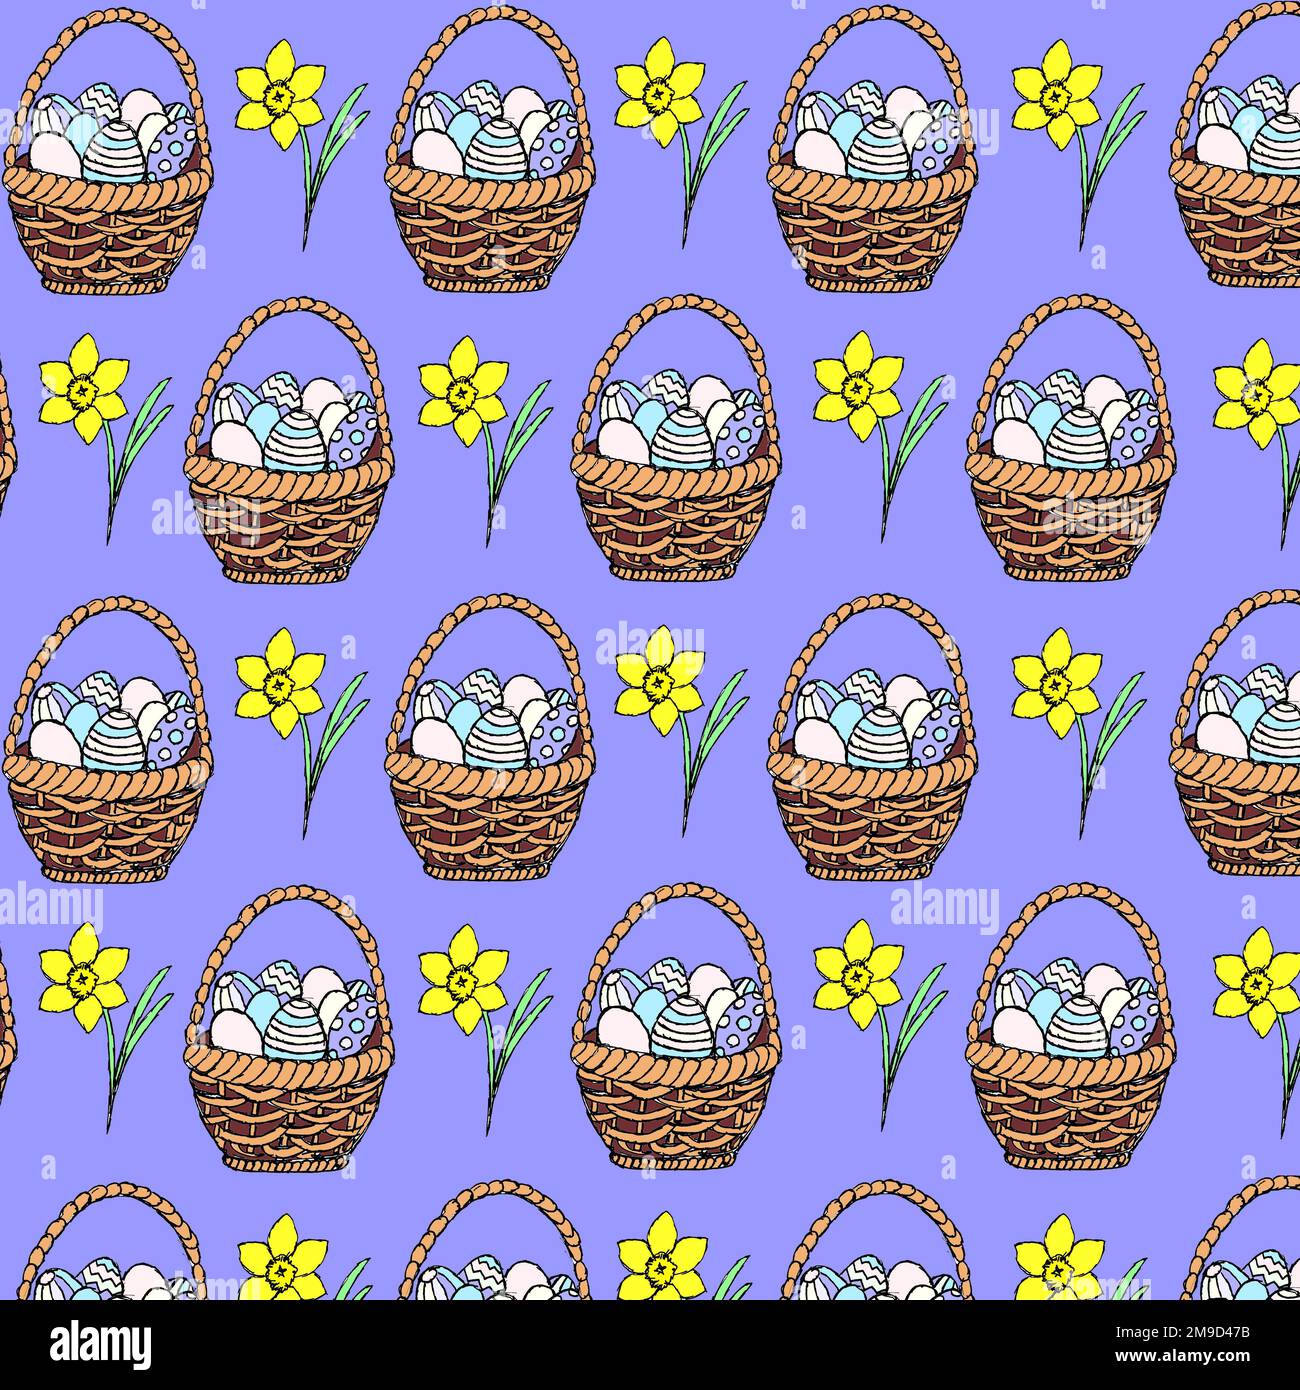 Basket of Easter eggs repeat pattern Stock Photo